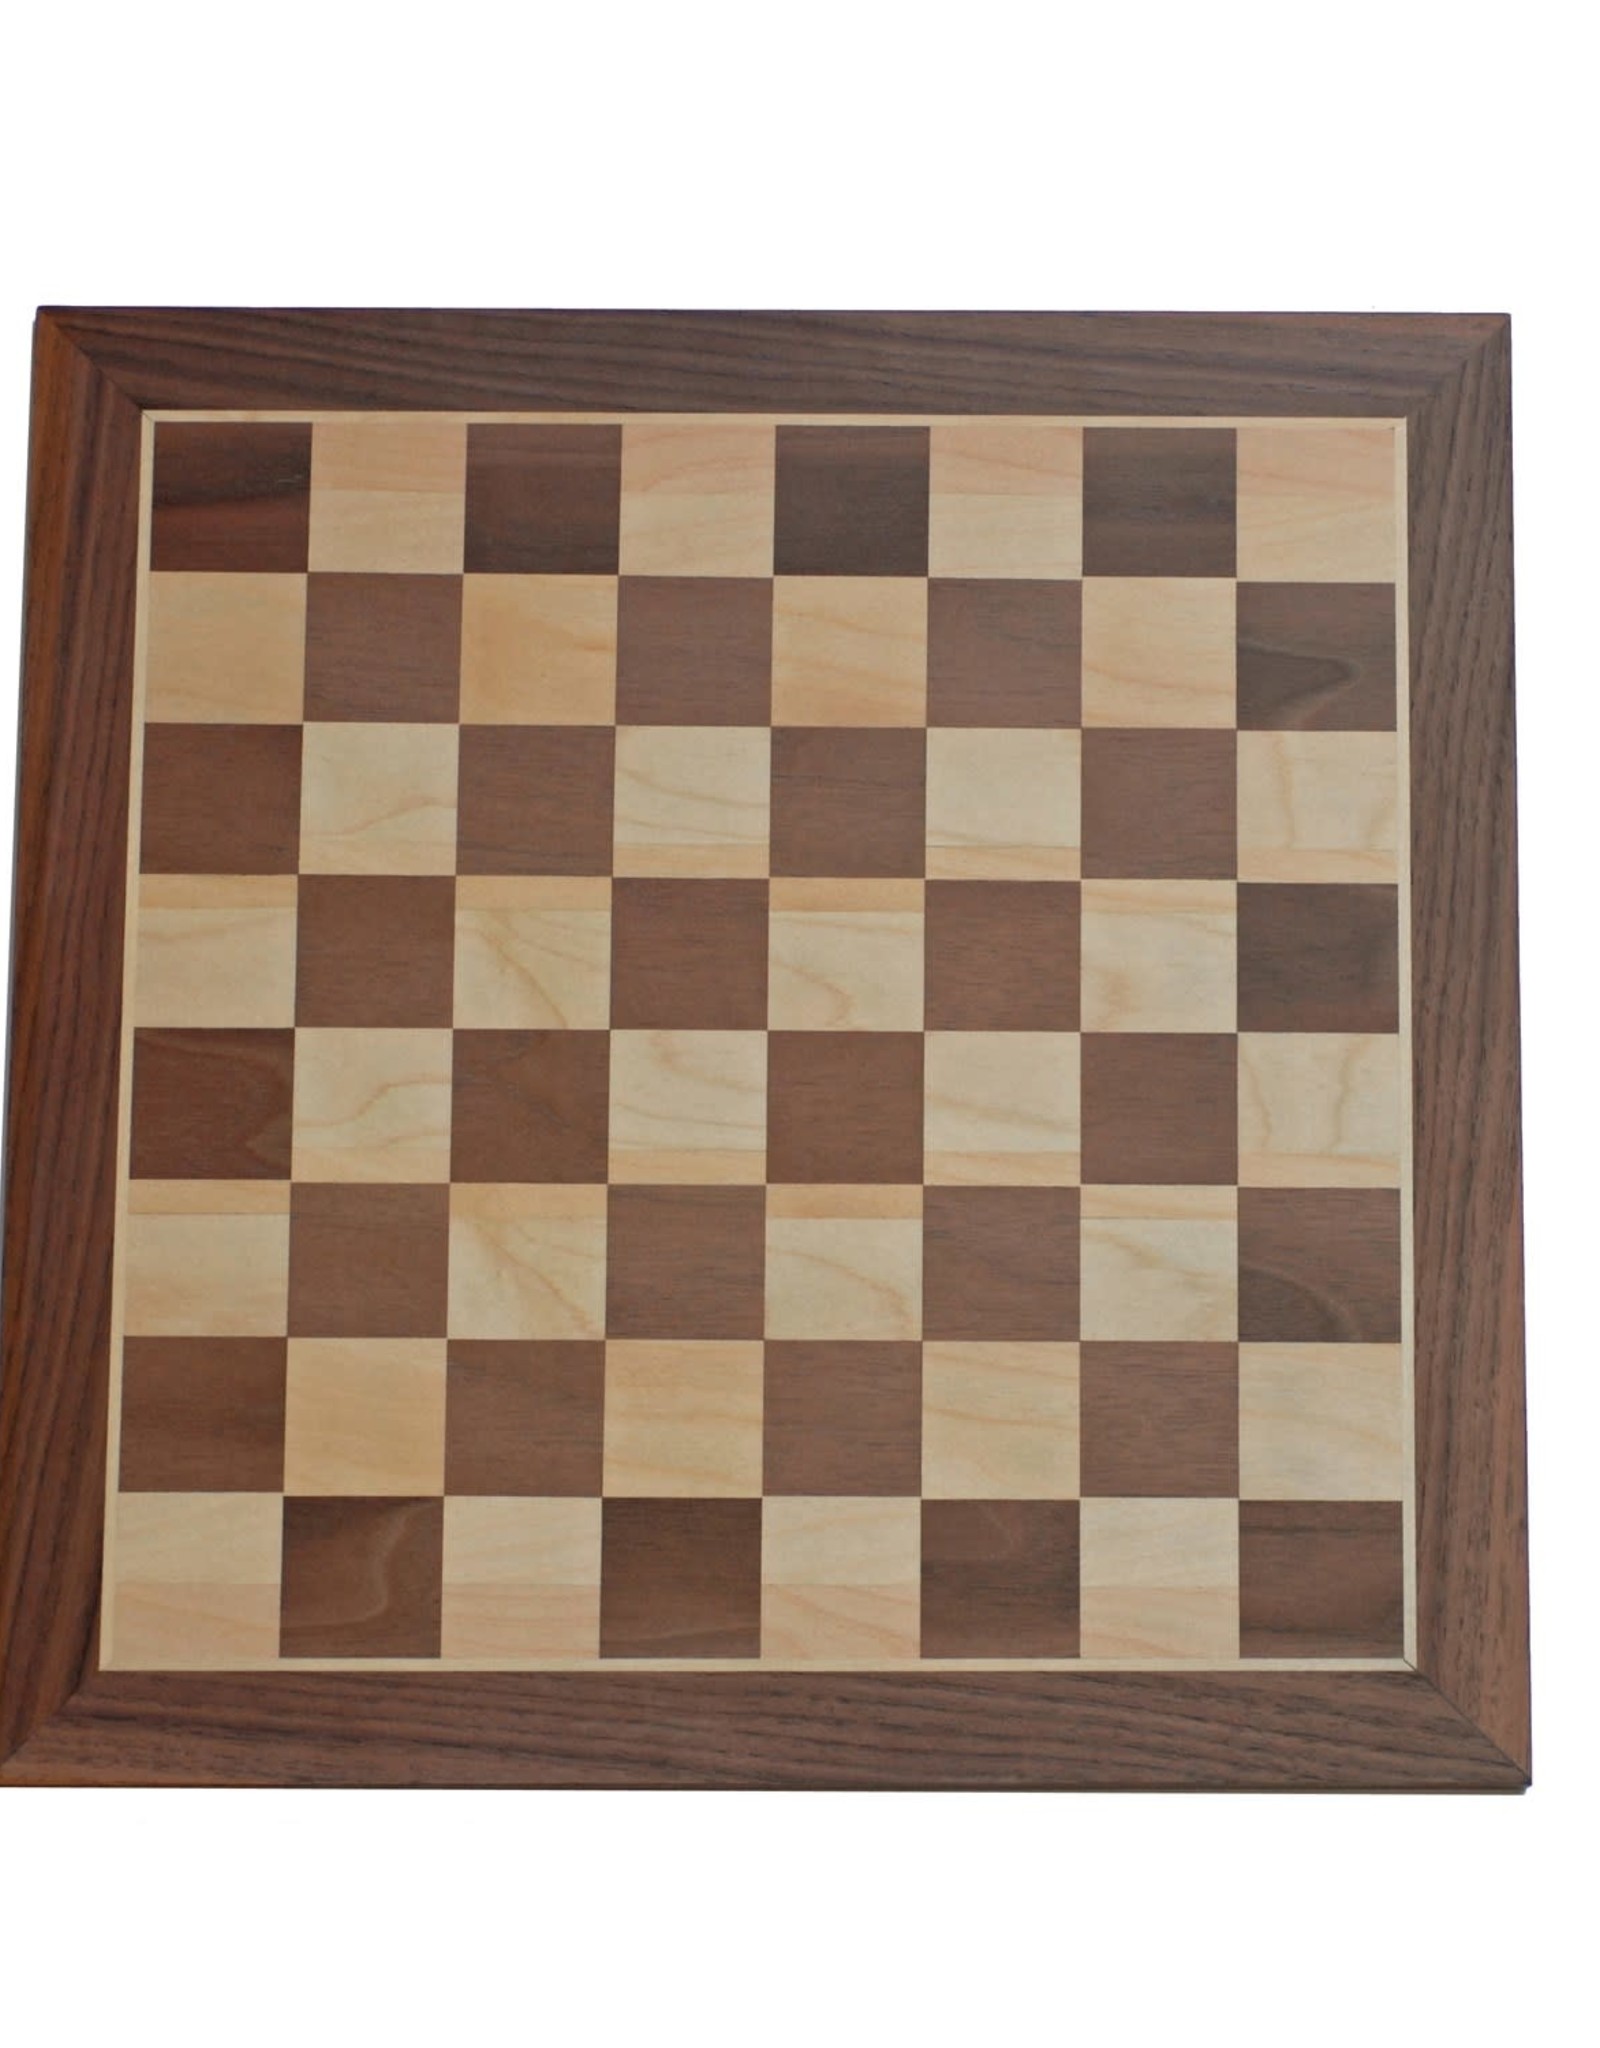 Chess Set: Medieval Polystone Pieces with 15 Inch Board